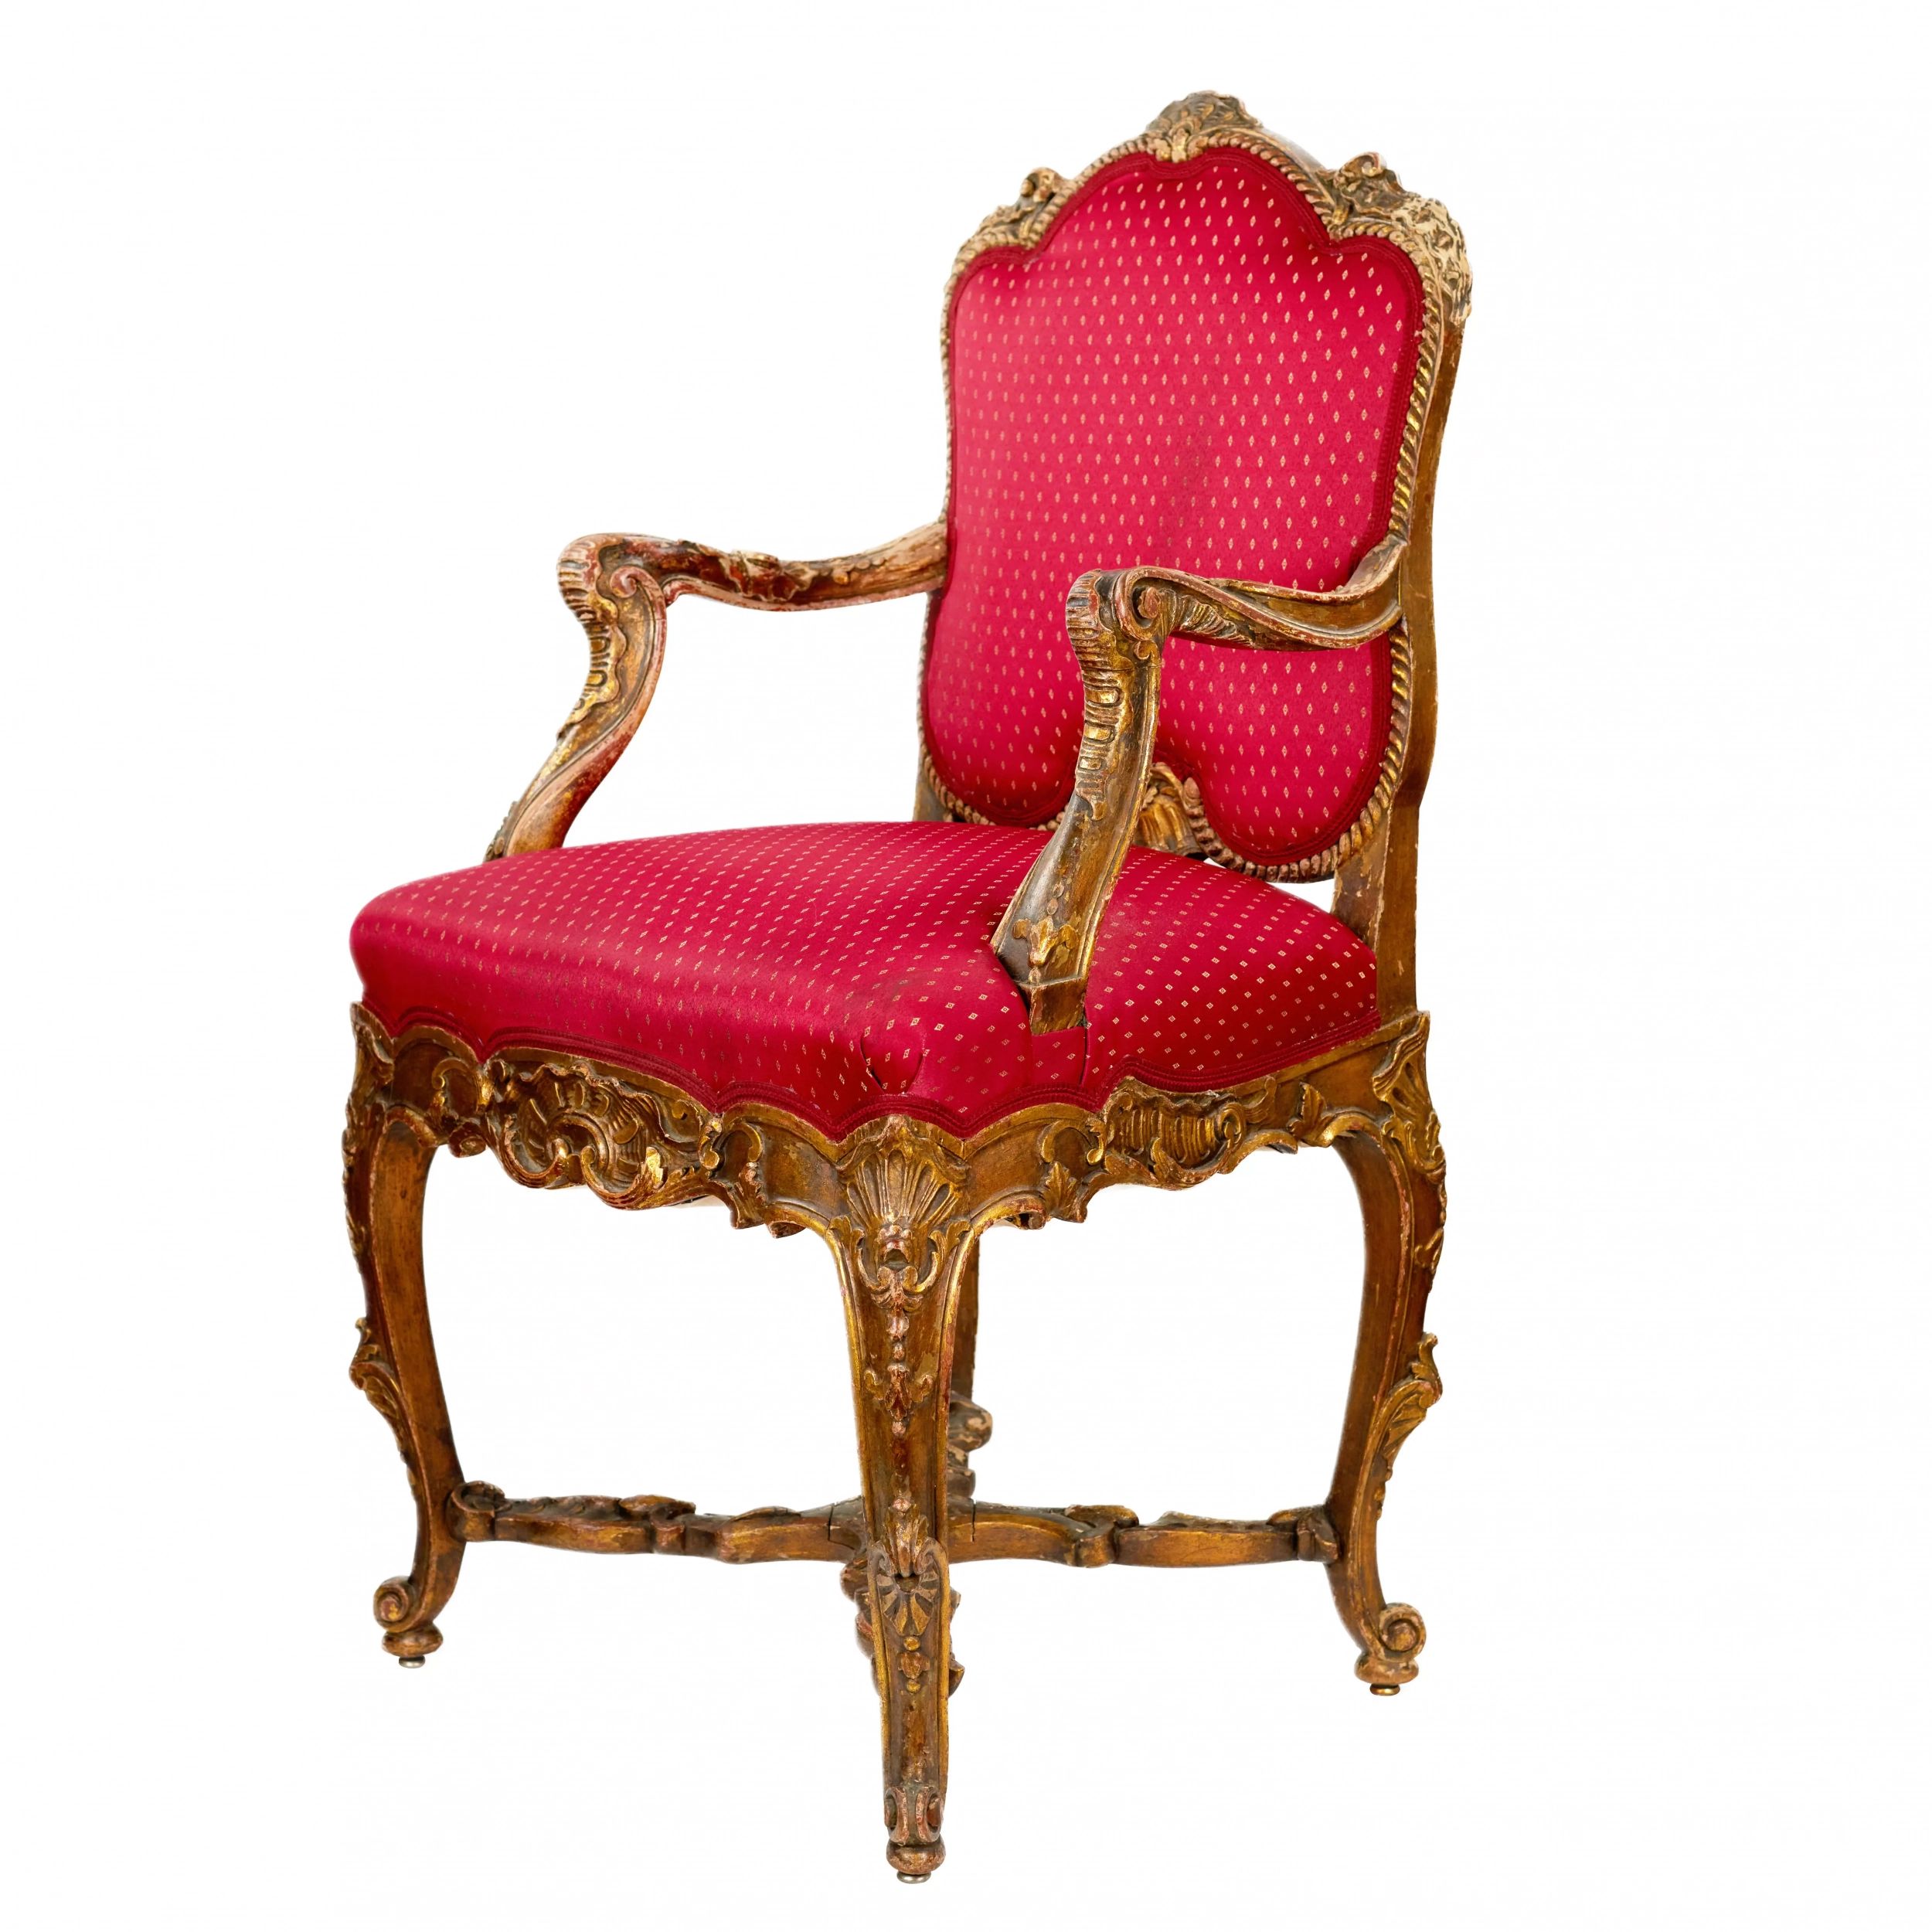 Magnificent-carved-armchair-in-the-Rococo-style-of-the-19th-and-20th-centuries-